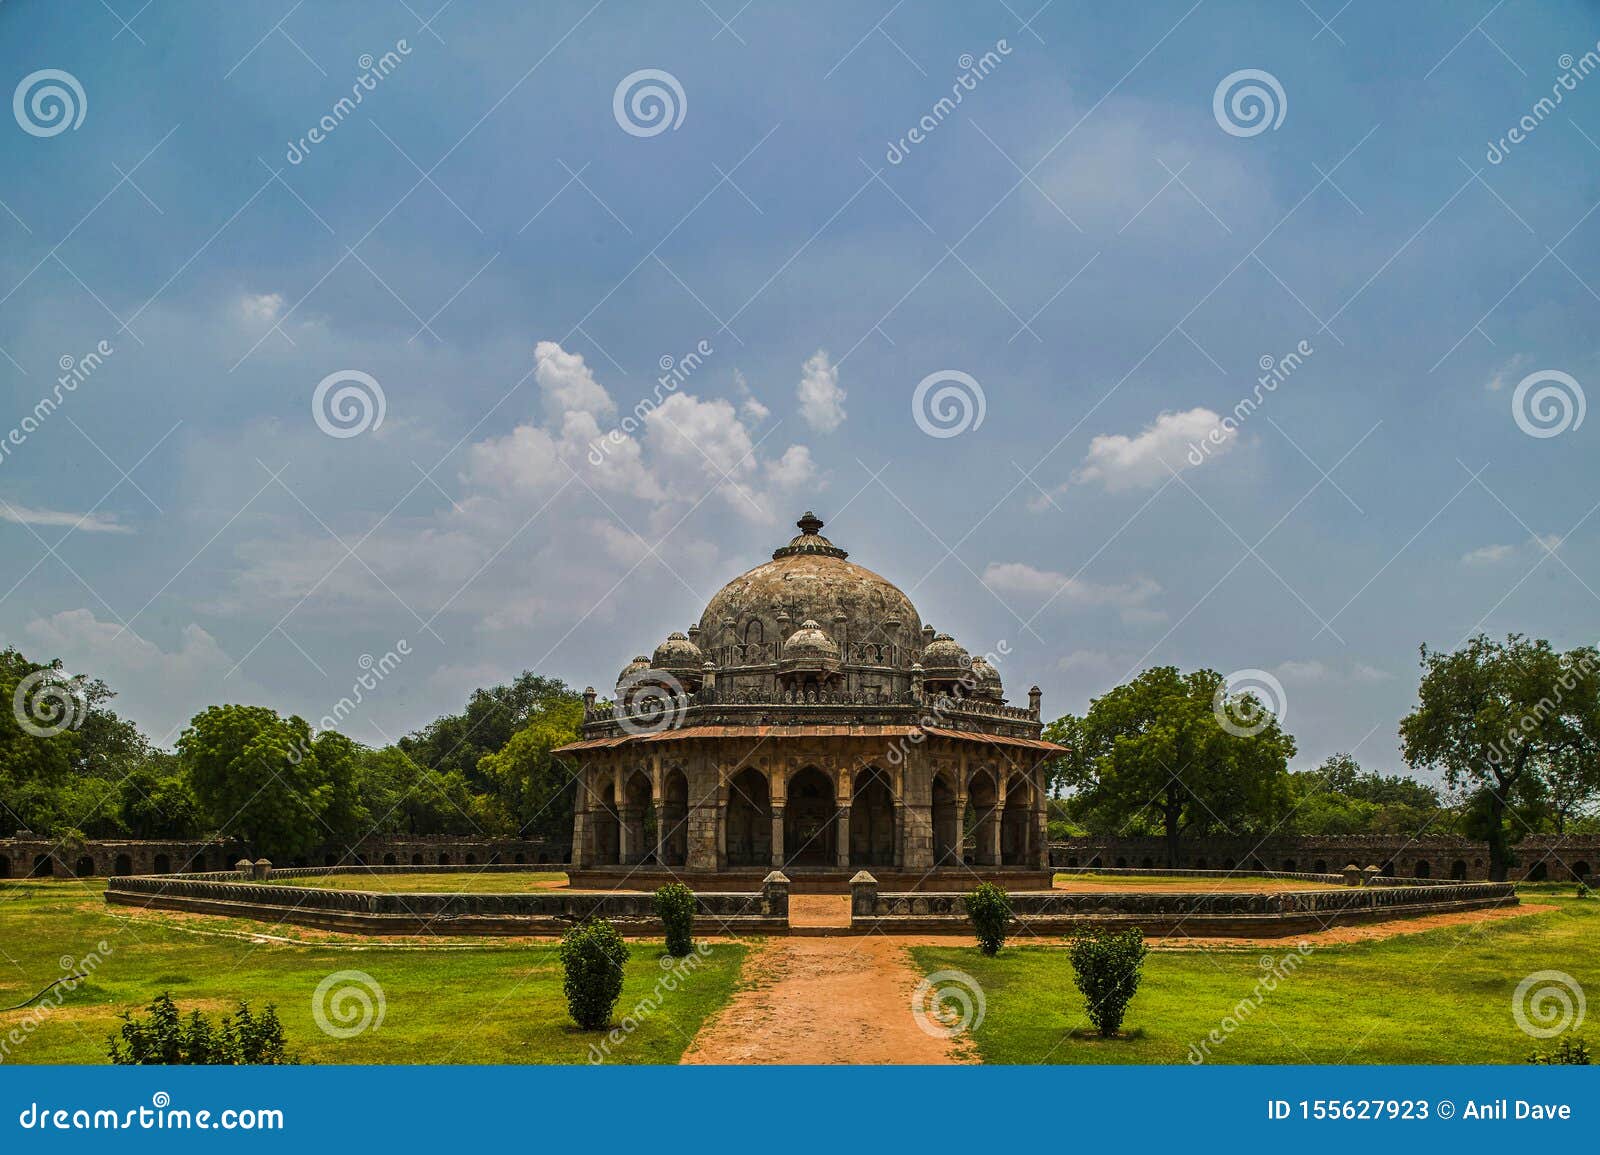 isha khan tomb hi was a pashtun noble in the courts of sher shah sur inside humayun tomb ; delhi